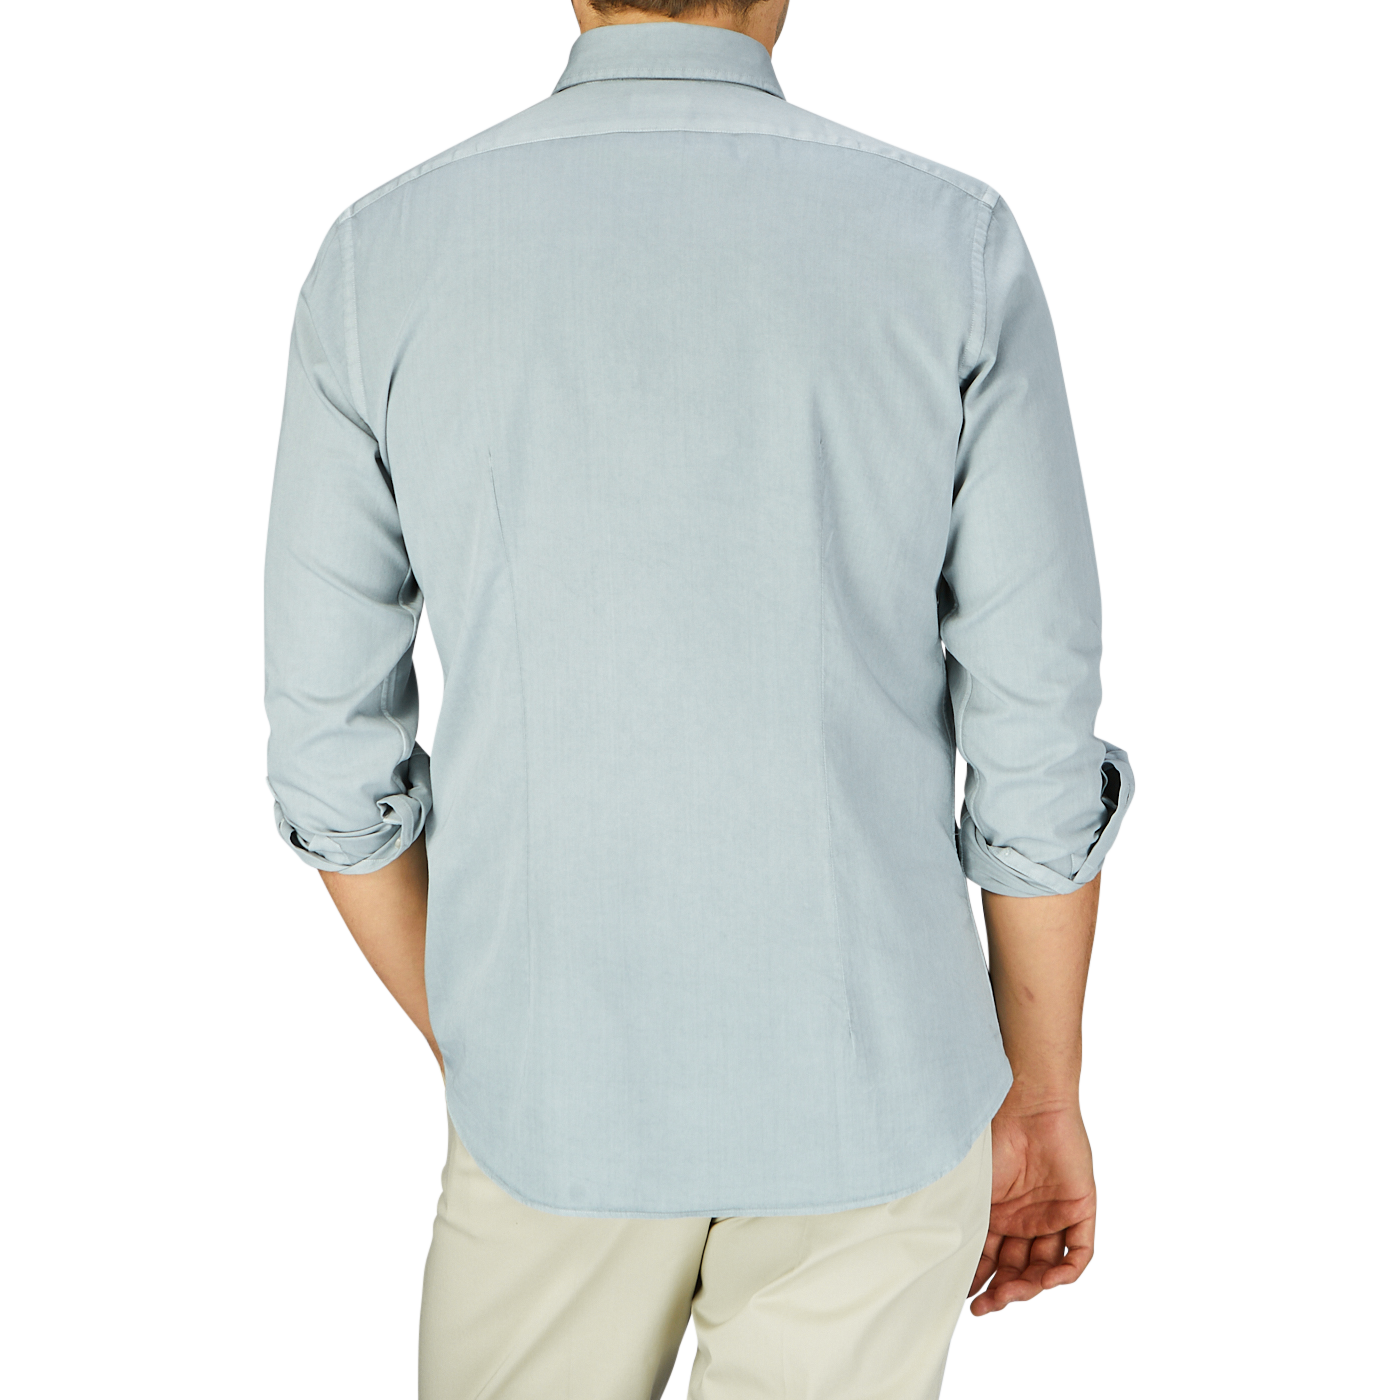 Man seen from behind wearing a Xacus Sage Green Cotton Twill Tailor Fit Shirt and beige pants.